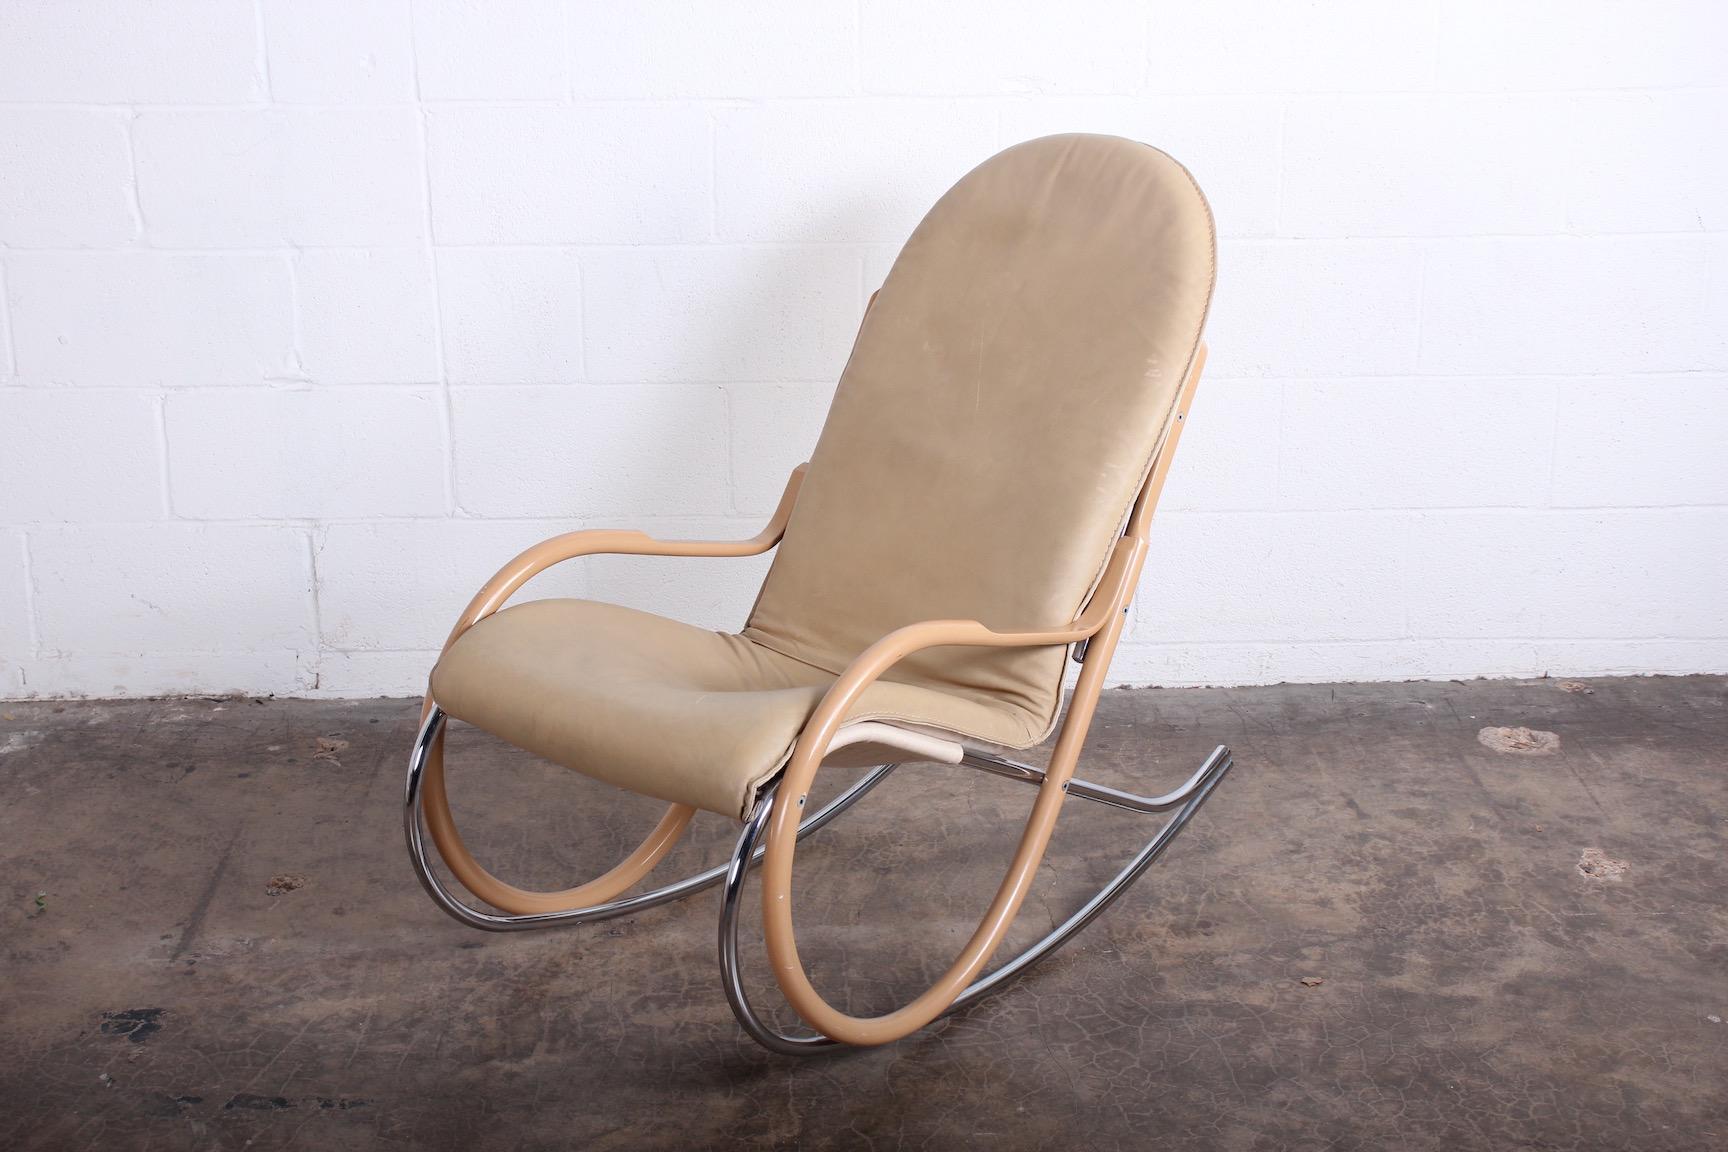 A leather, canvas, chrome-plated steel and lacquered wood 'Nonna' rocking chair design by Paul Tuttle.